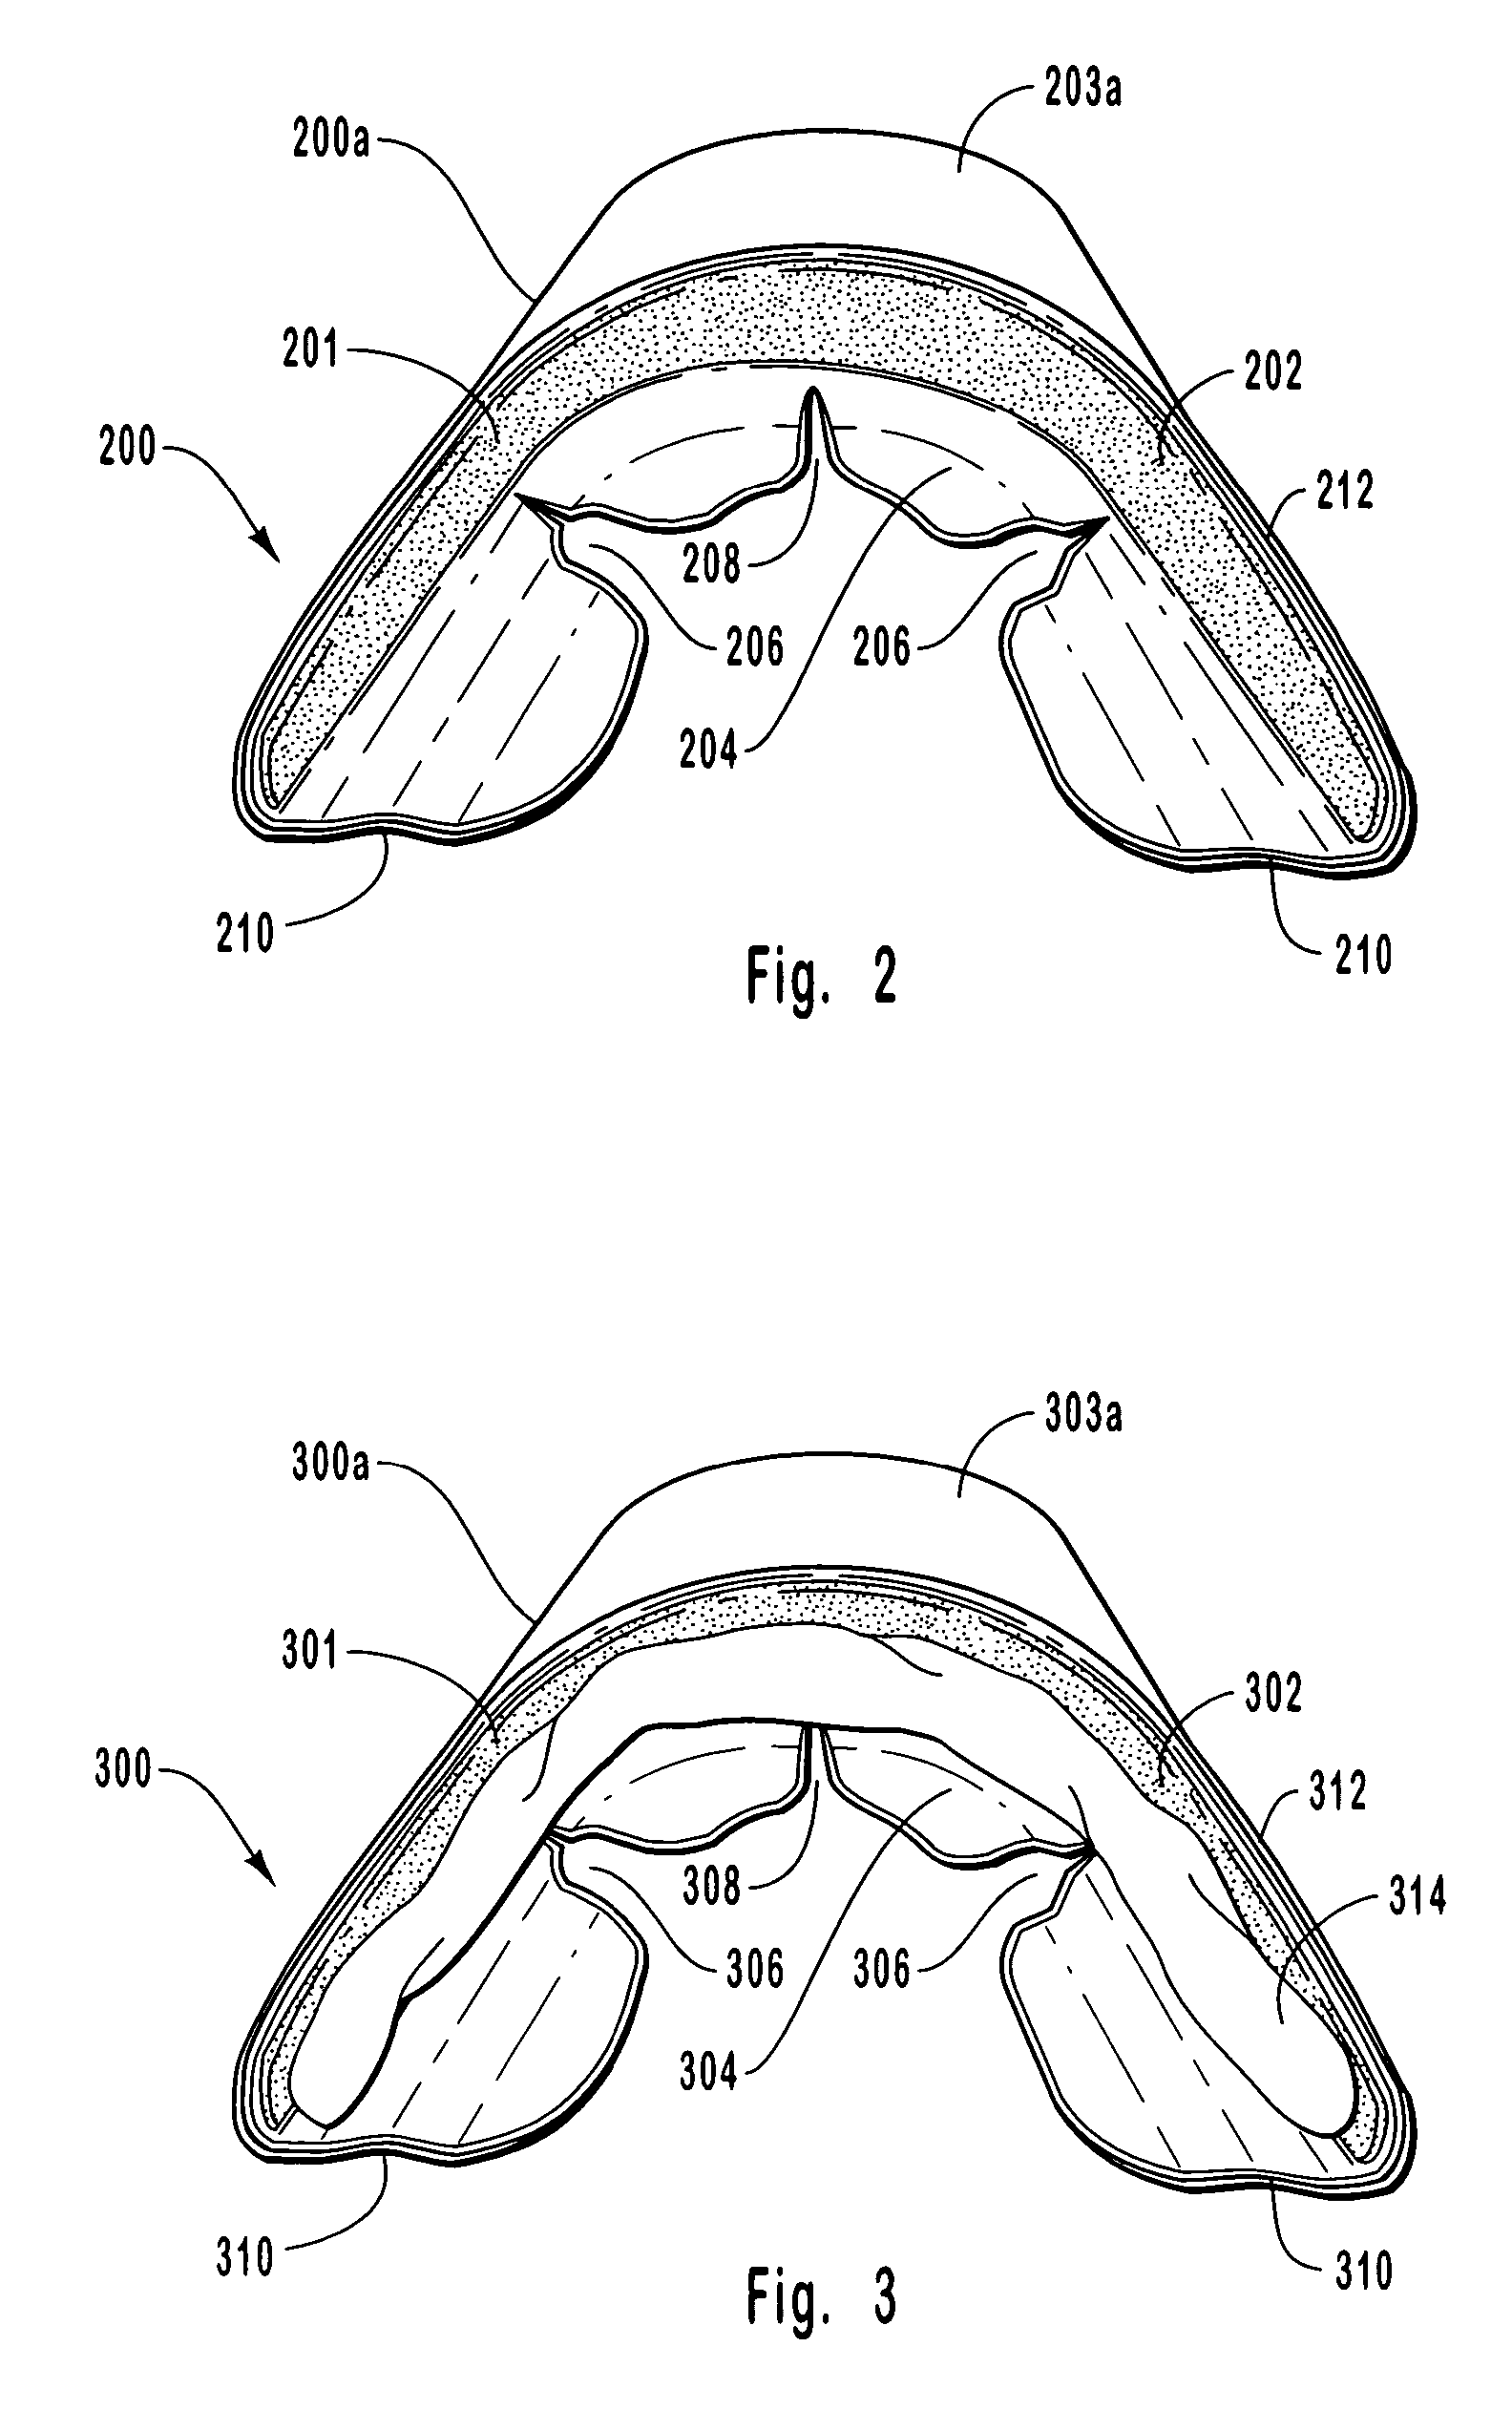 Universal non-custom dental tray having anatomical features to enhance fit